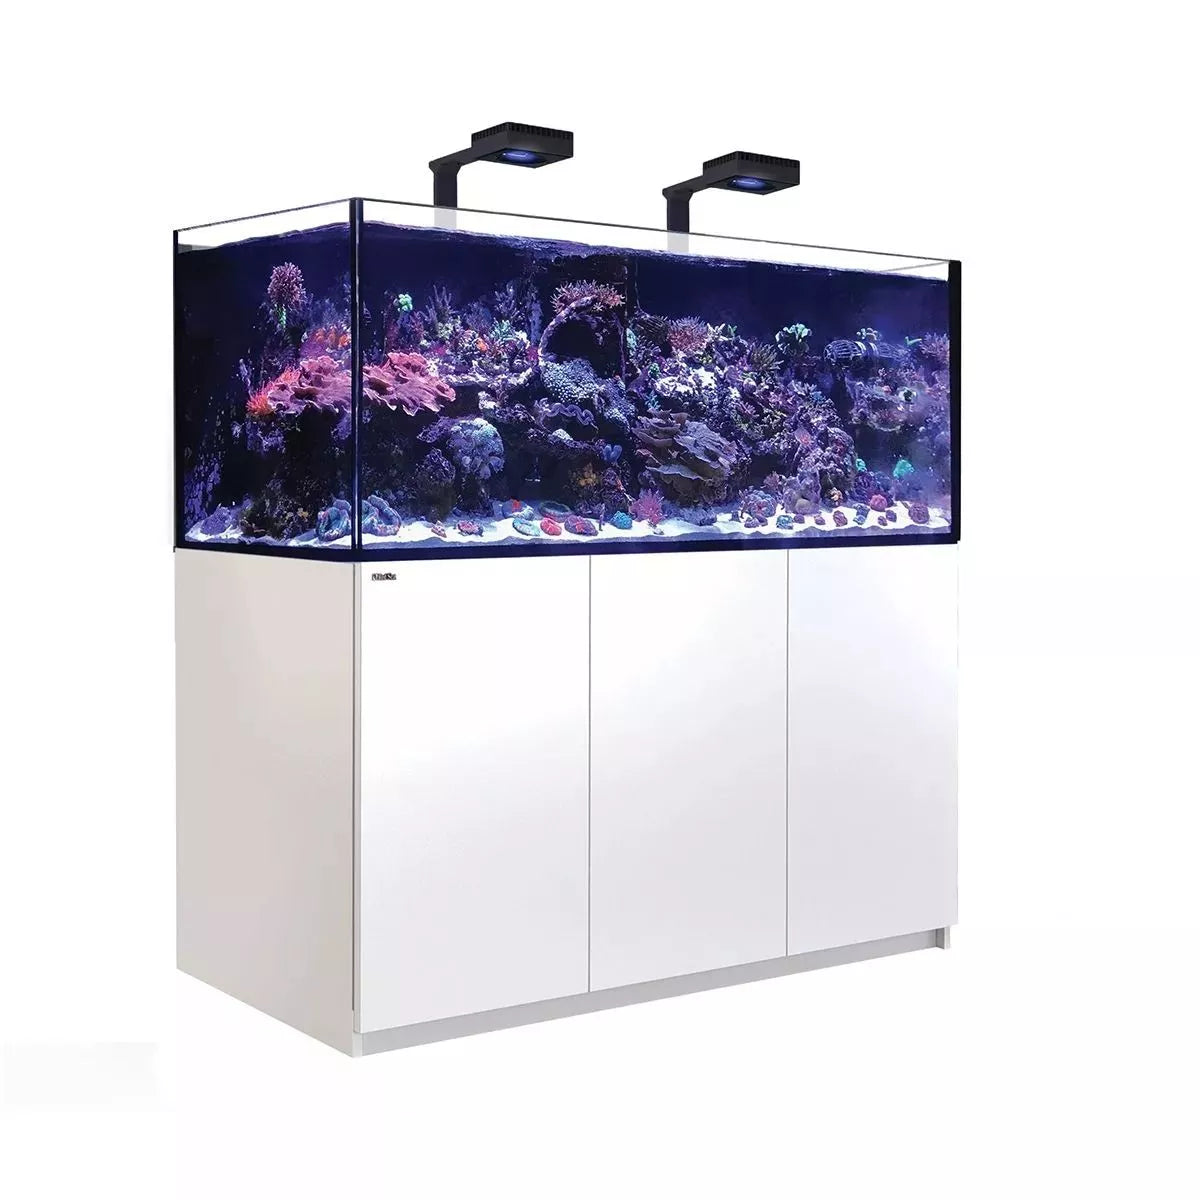 Reefer MAX 625 G2+ System (132 Gal) - Red Sea